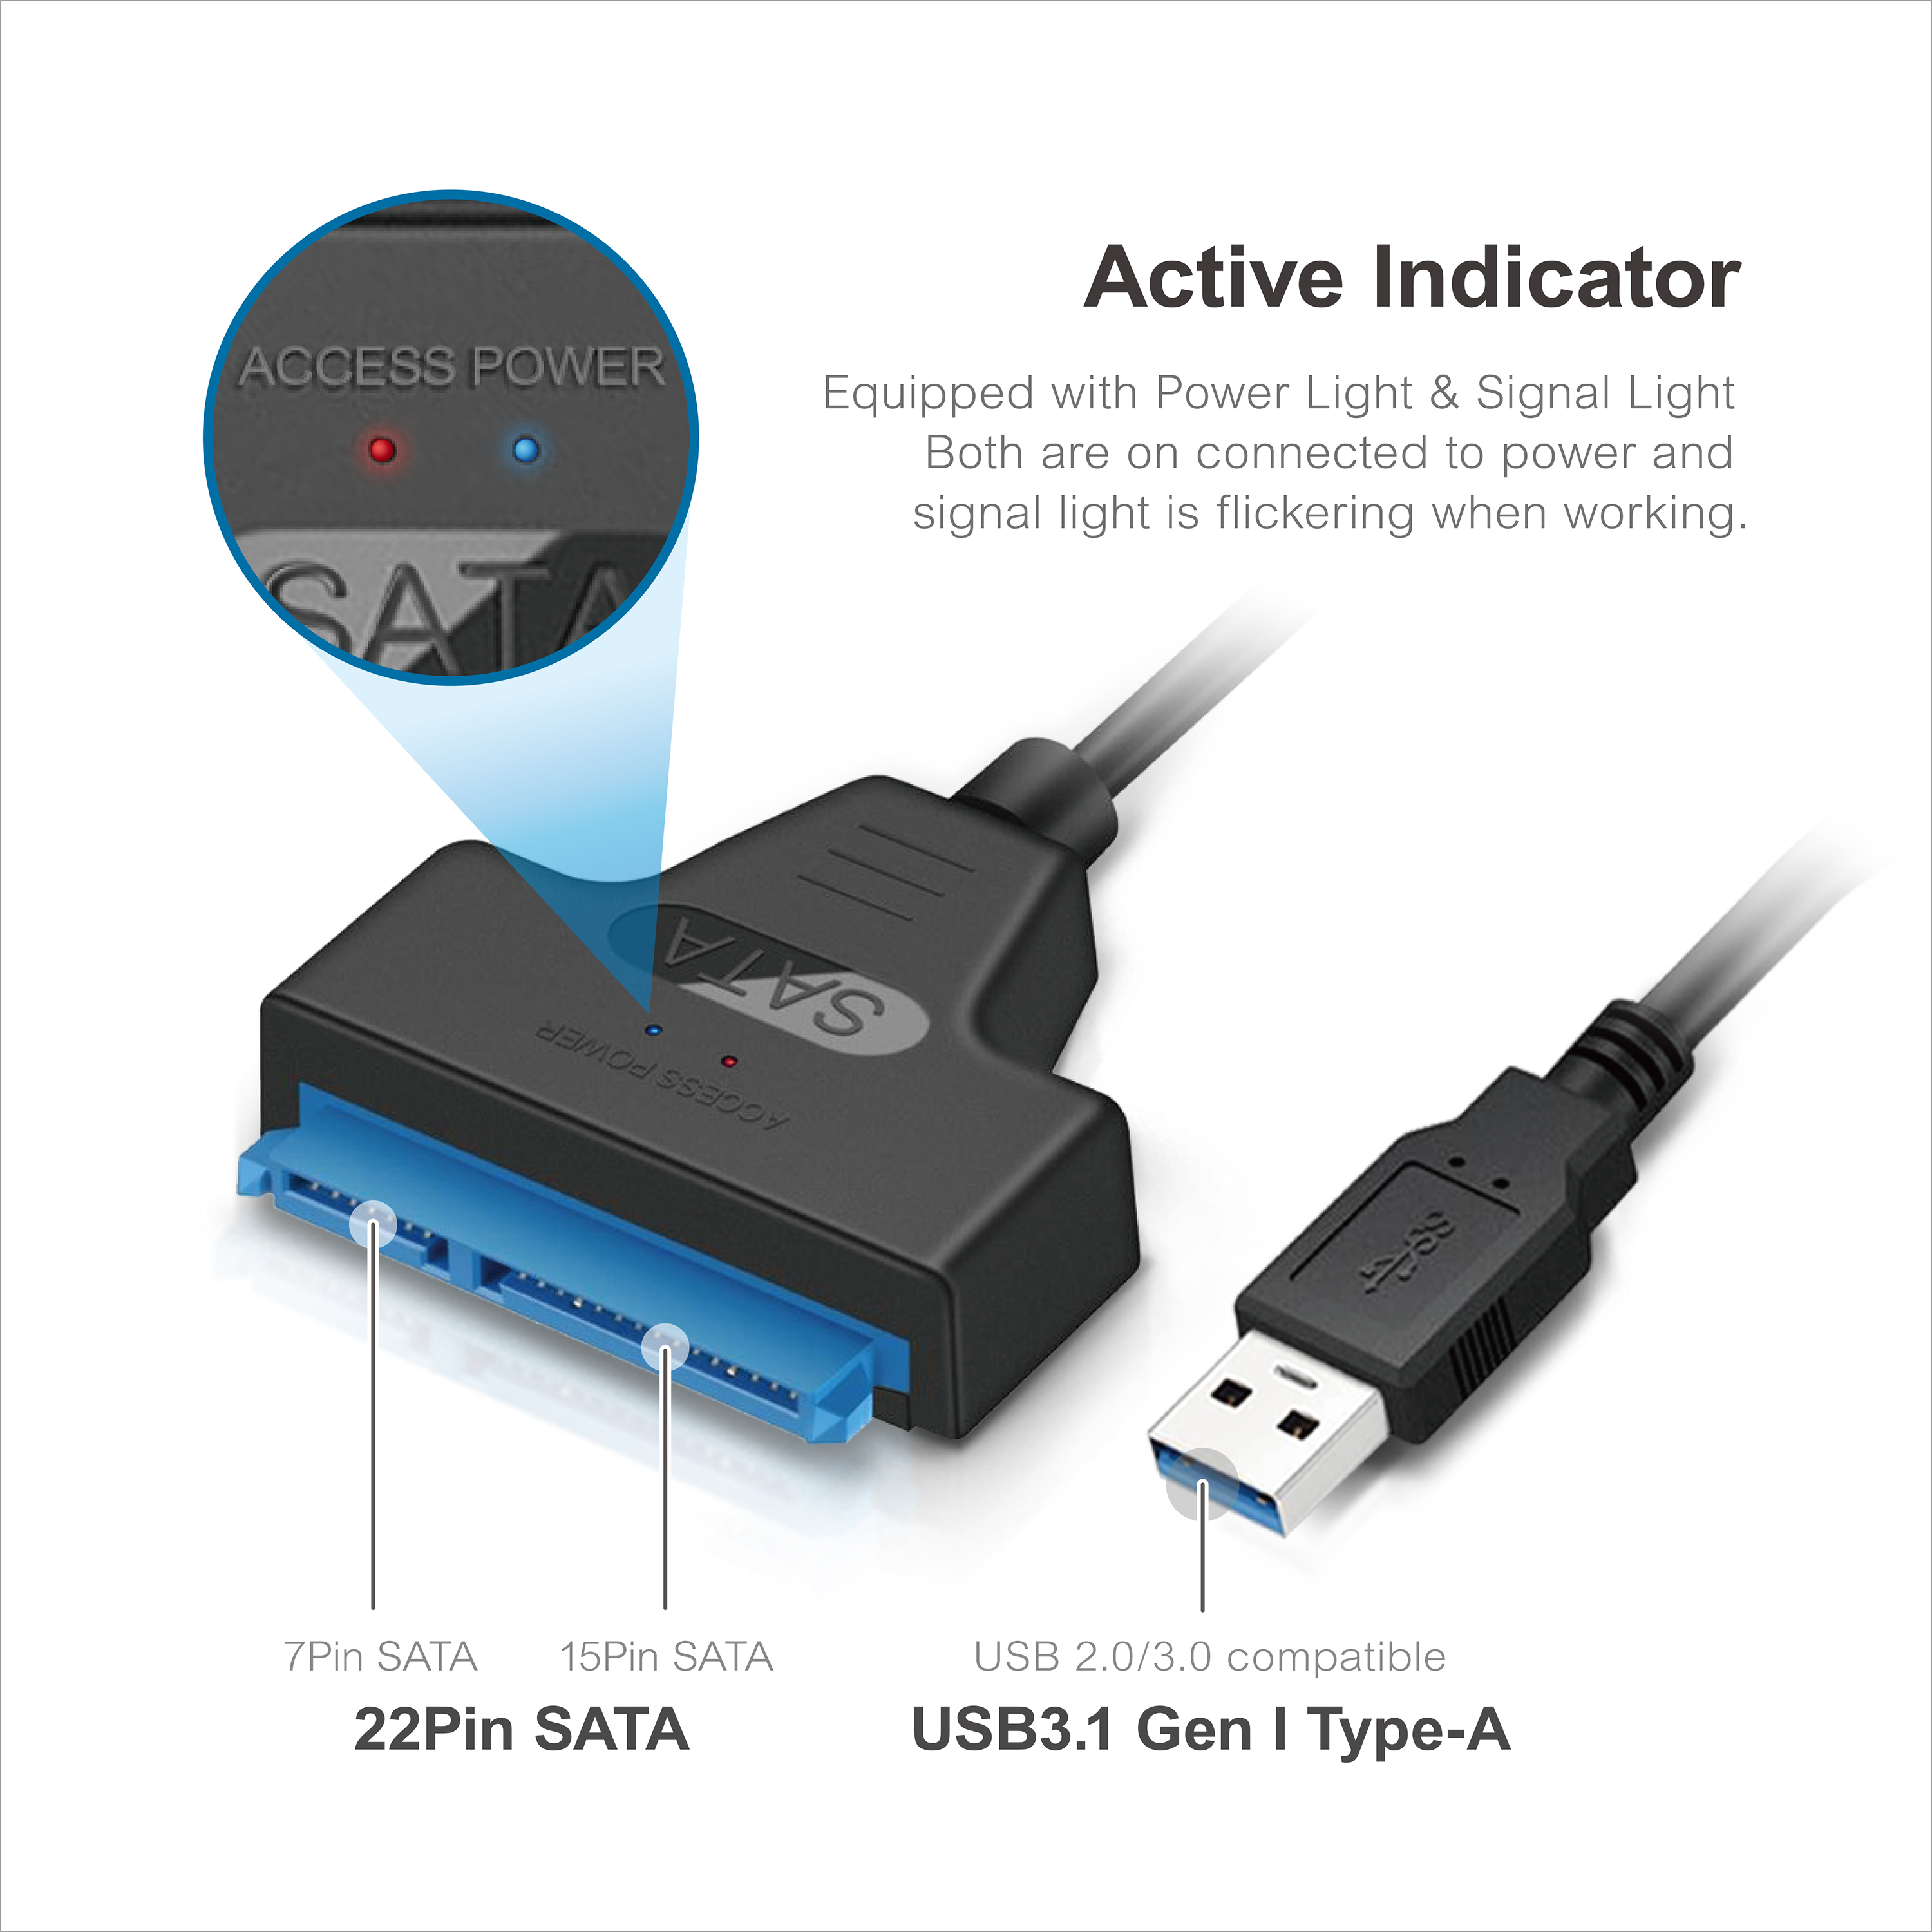 Mediasonic SATA to USB Cable – USB 3.0 / USB 3.1 Gen 1 to 2.5” SATA SSD / Hard Drive Adapter Cable (Optimized for SSD, Support UASP and SATA 3 6.0Gbps transfer rate) (HND5-SU3) - image 4 of 6